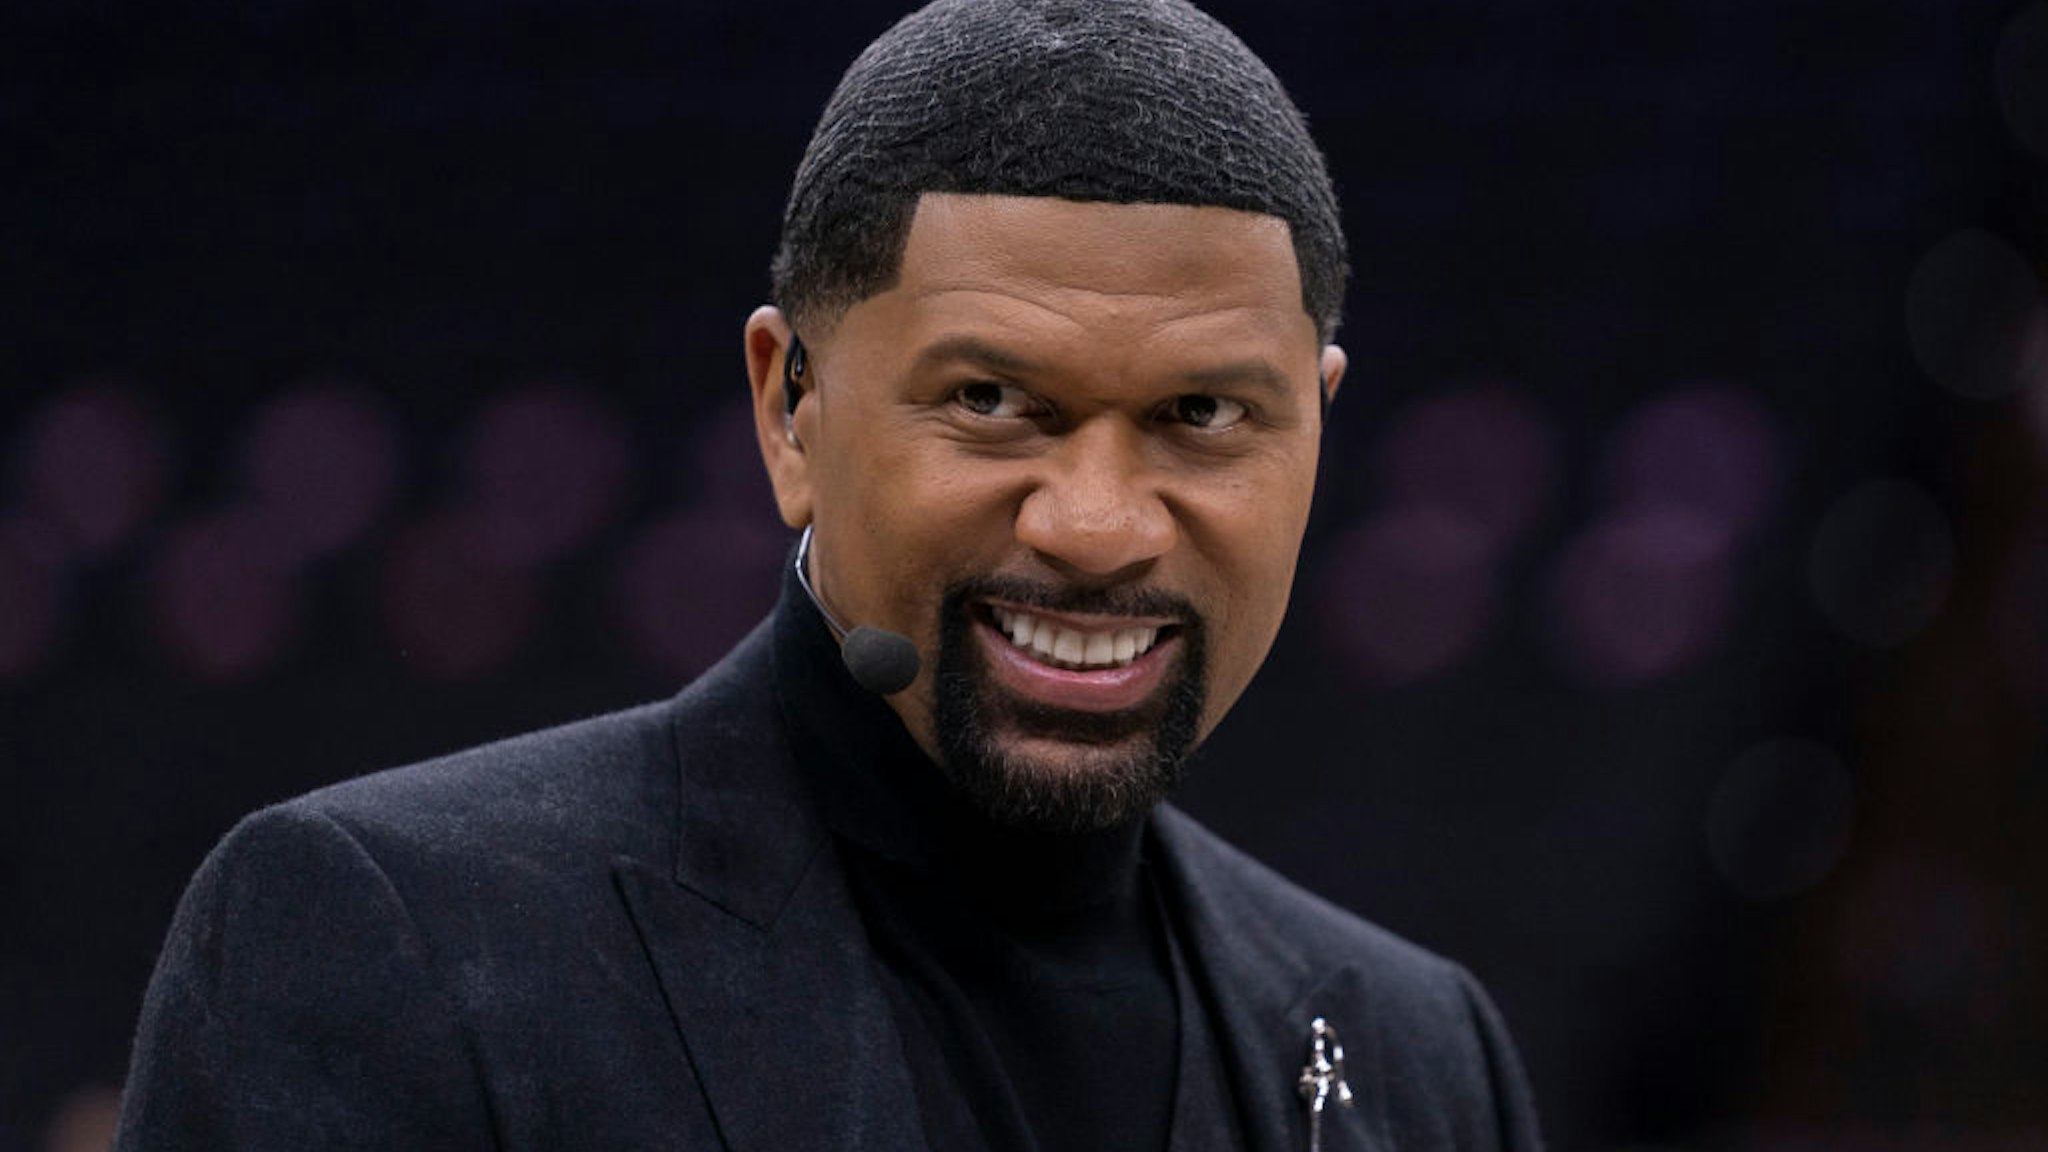 PHILADELPHIA, PA - JANUARY 25: ESPN analyst Jalen Rose looks on prior to the game between the Los Angeles Lakers and Philadelphia 76ers at the Wells Fargo Center on January 25, 2020 in Philadelphia, Pennsylvania. NOTE TO USER: User expressly acknowledges and agrees that, by downloading and/or using this photograph, user is consenting to the terms and conditions of the Getty Images License Agreement. (Photo by Mitchell Leff/Getty Images)